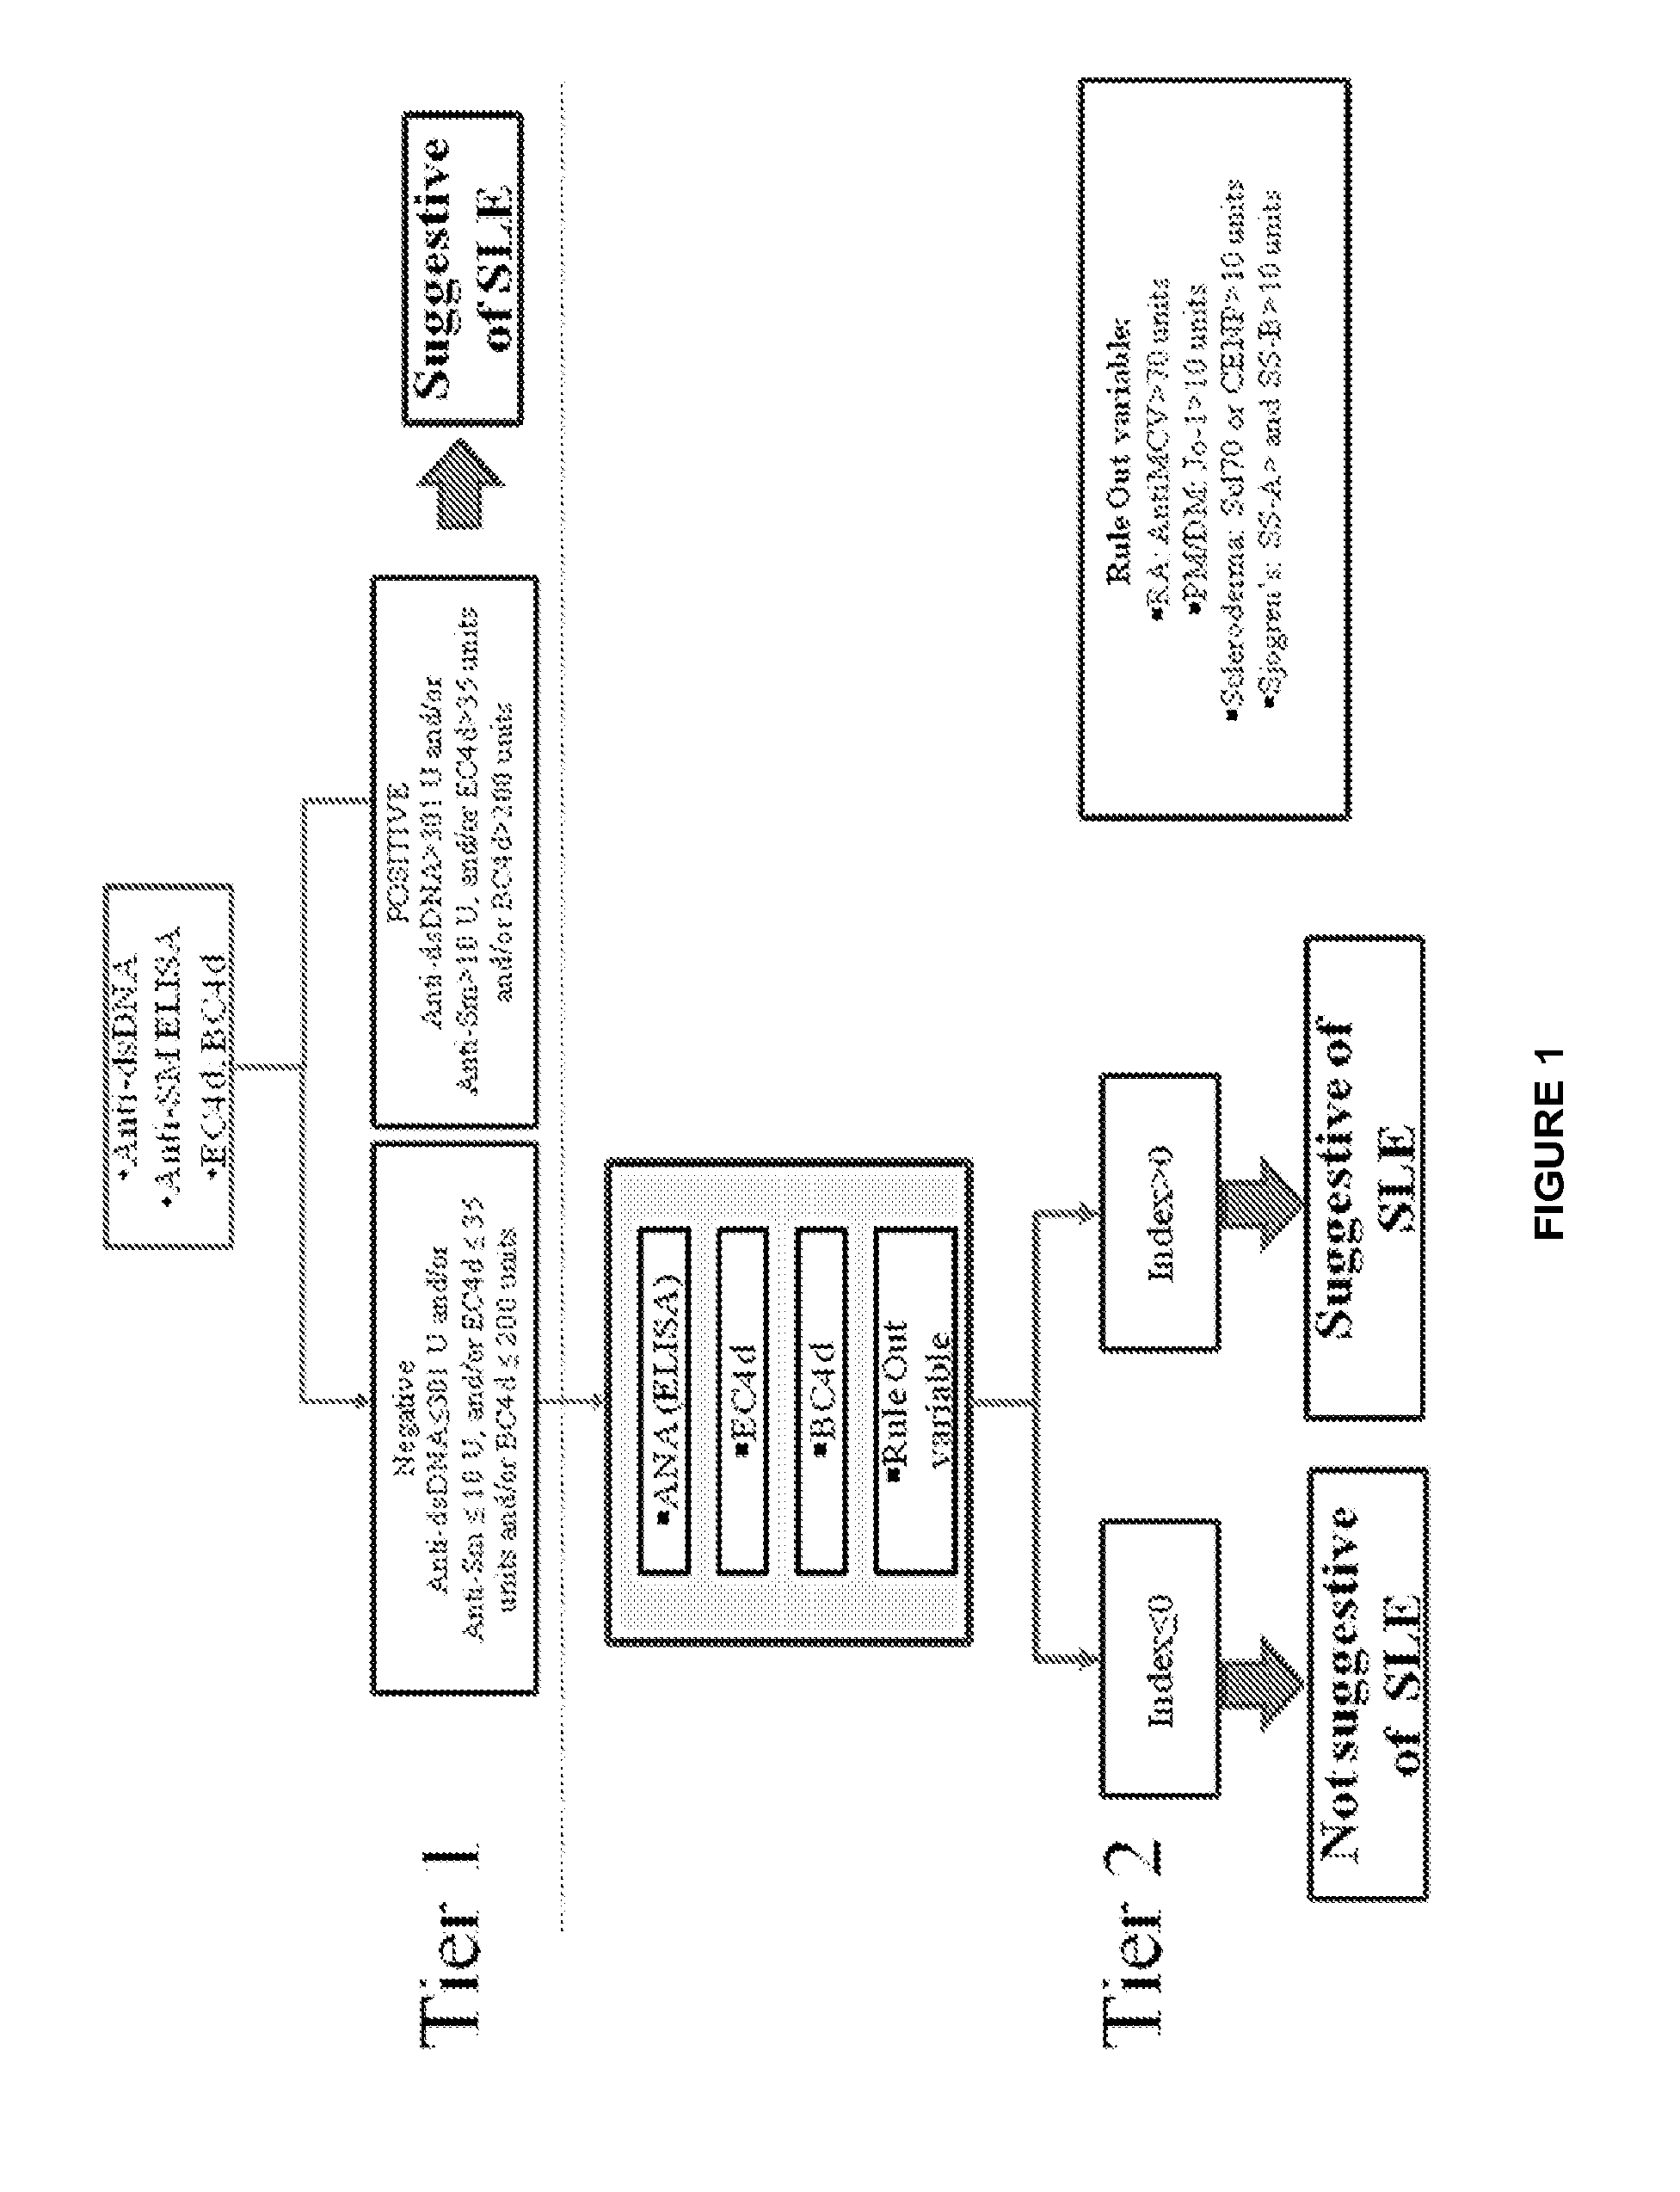 Methods for treating and diagnosing Systemic Lupus Erythematosus